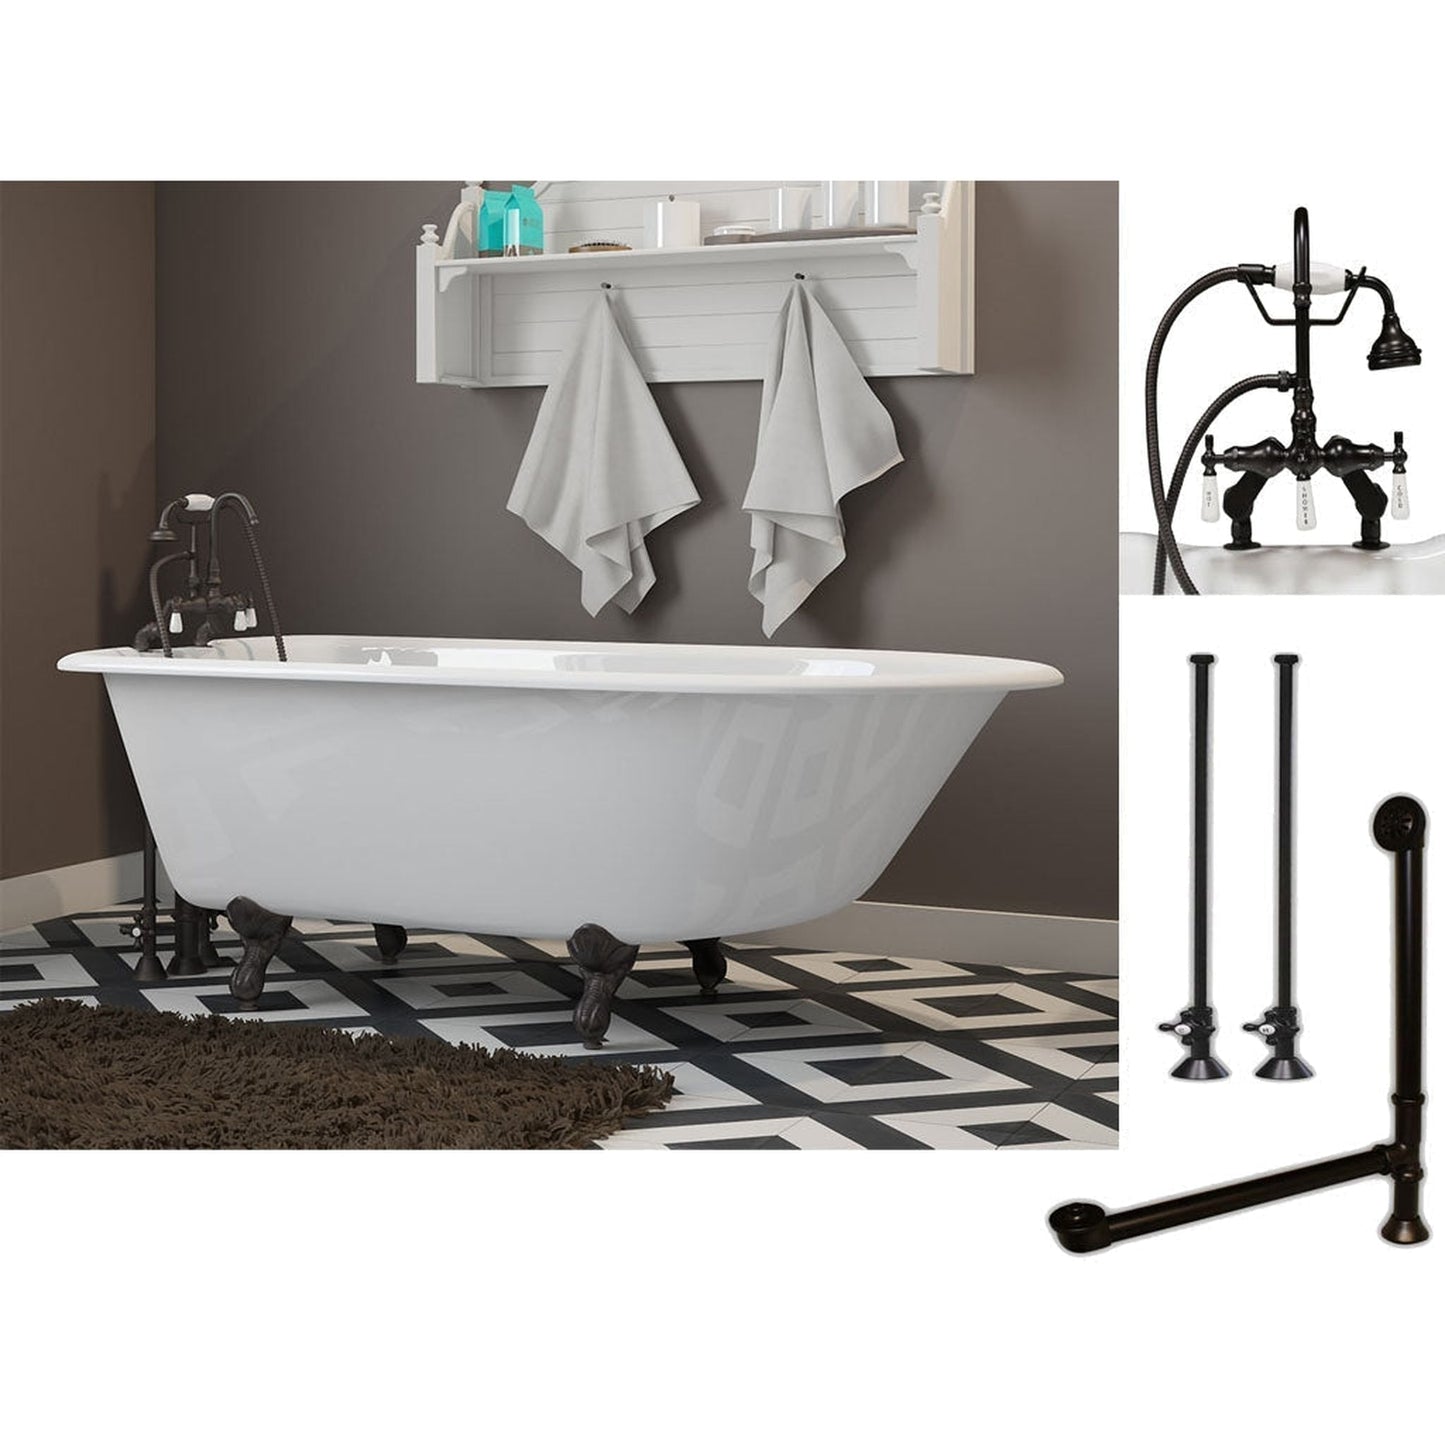 Cambridge Plumbing 54" White Cast Iron Rolled Rim Clawfoot Bathtub With Deck Holes And Complete Plumbing Package Including Porcelain Lever English Telephone Brass Faucet, Supply Lines, Drain And Overflow Assembly In Oil Rubbed Bronze